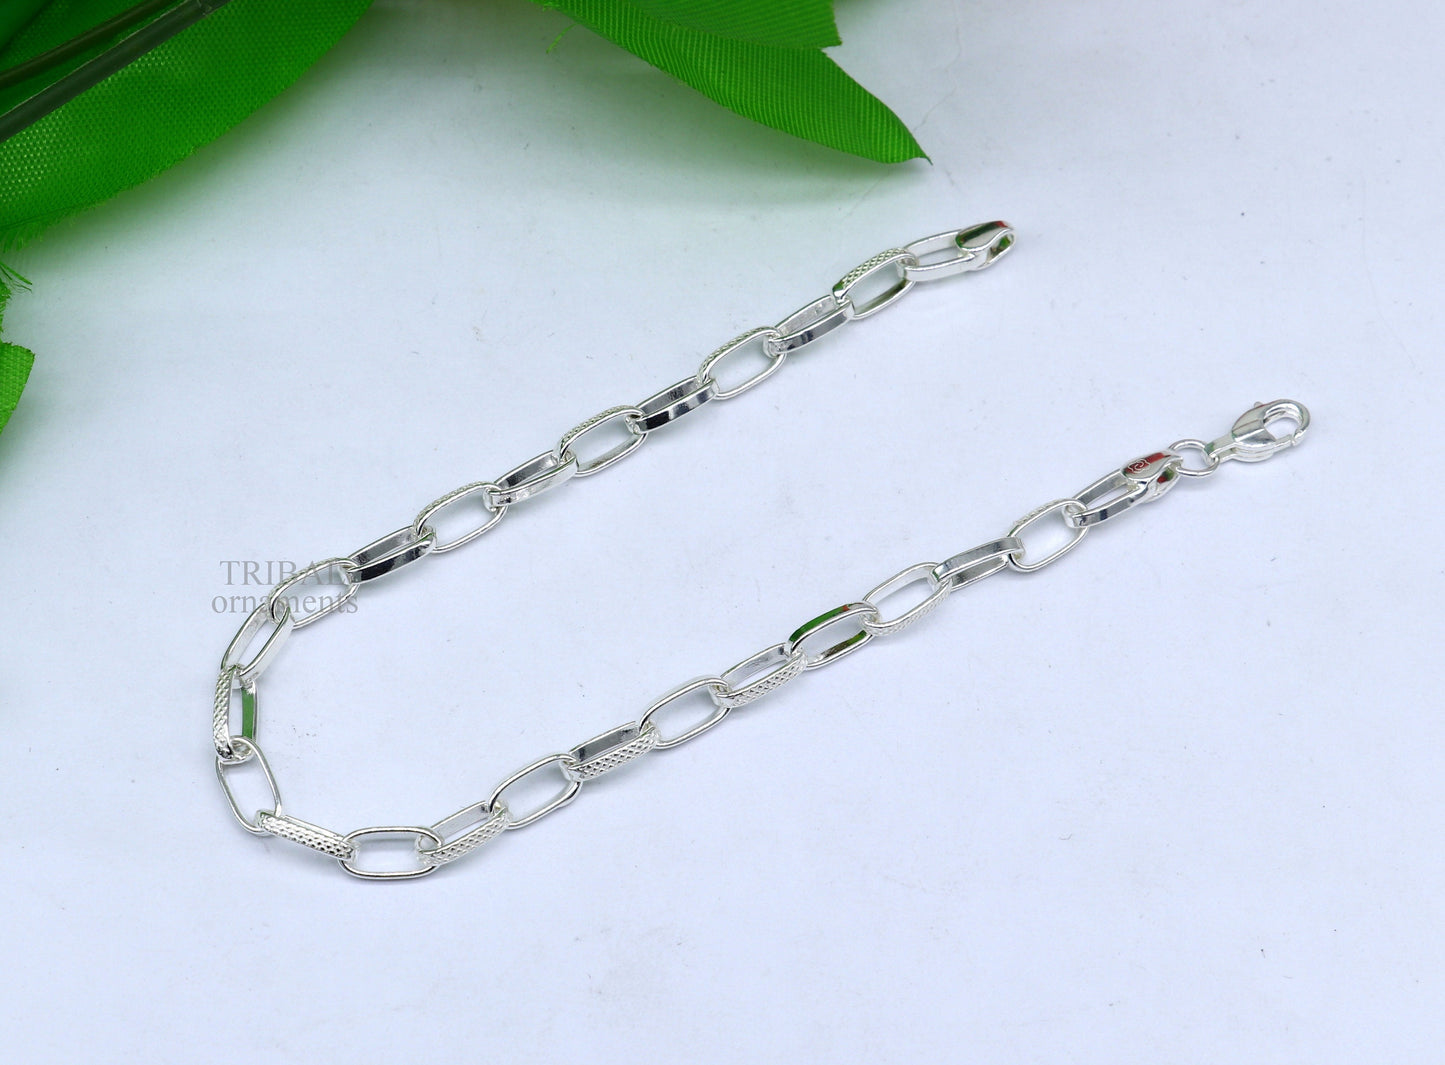 Exclusive 925 sterling silver handmade Bracelet for girl's, Dainty Silver Bracelet, Chain Bracelet, Minimal Jewelry, Gift For Women nsbr523 - TRIBAL ORNAMENTS